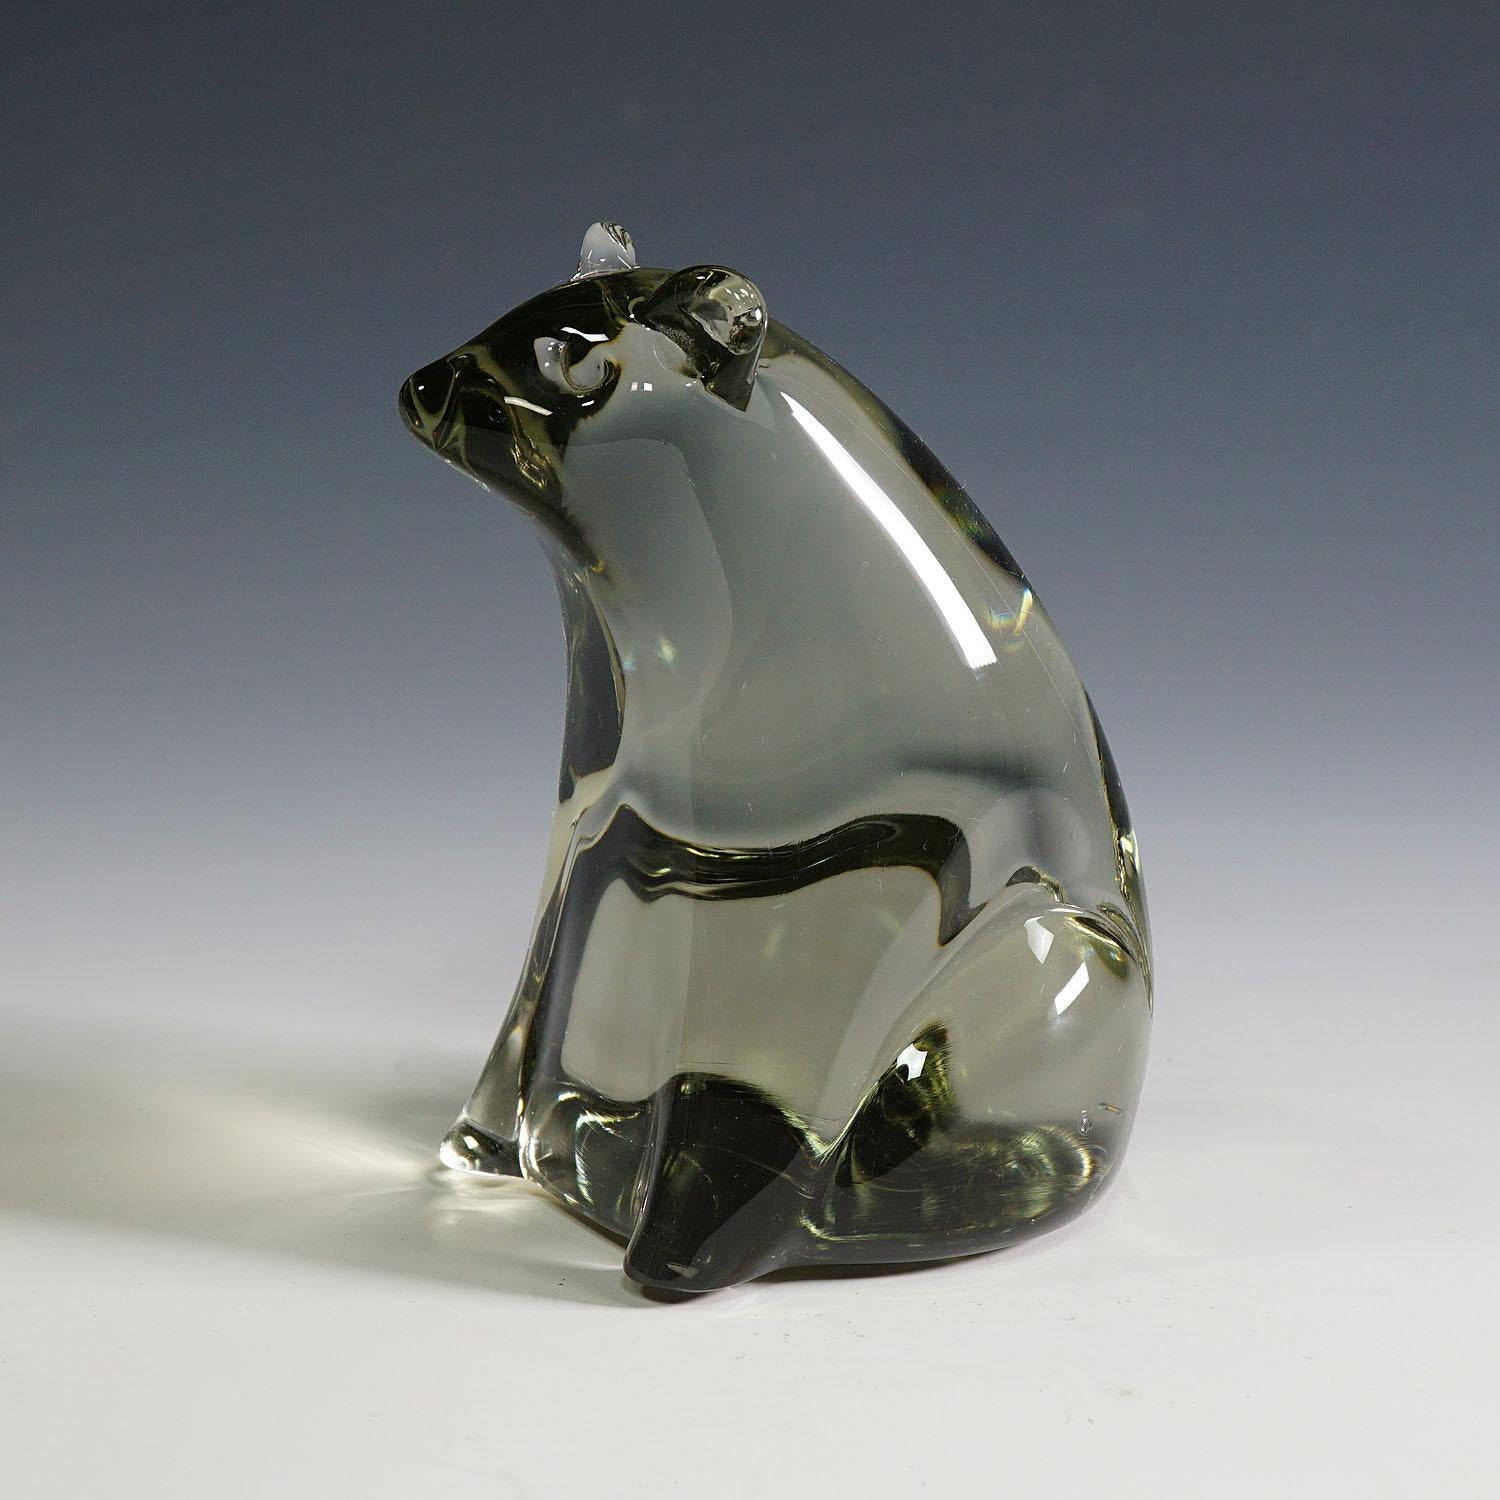 Bear Artglass sculpture Designed by Livio Seguso, circa 1970s

A stylized sculpture of a bear in solid smoke grey glass. It is hand made in the Gral glass manufactory, Germany. Designed by glass artist Livio Seguso in the 1970s. The base with